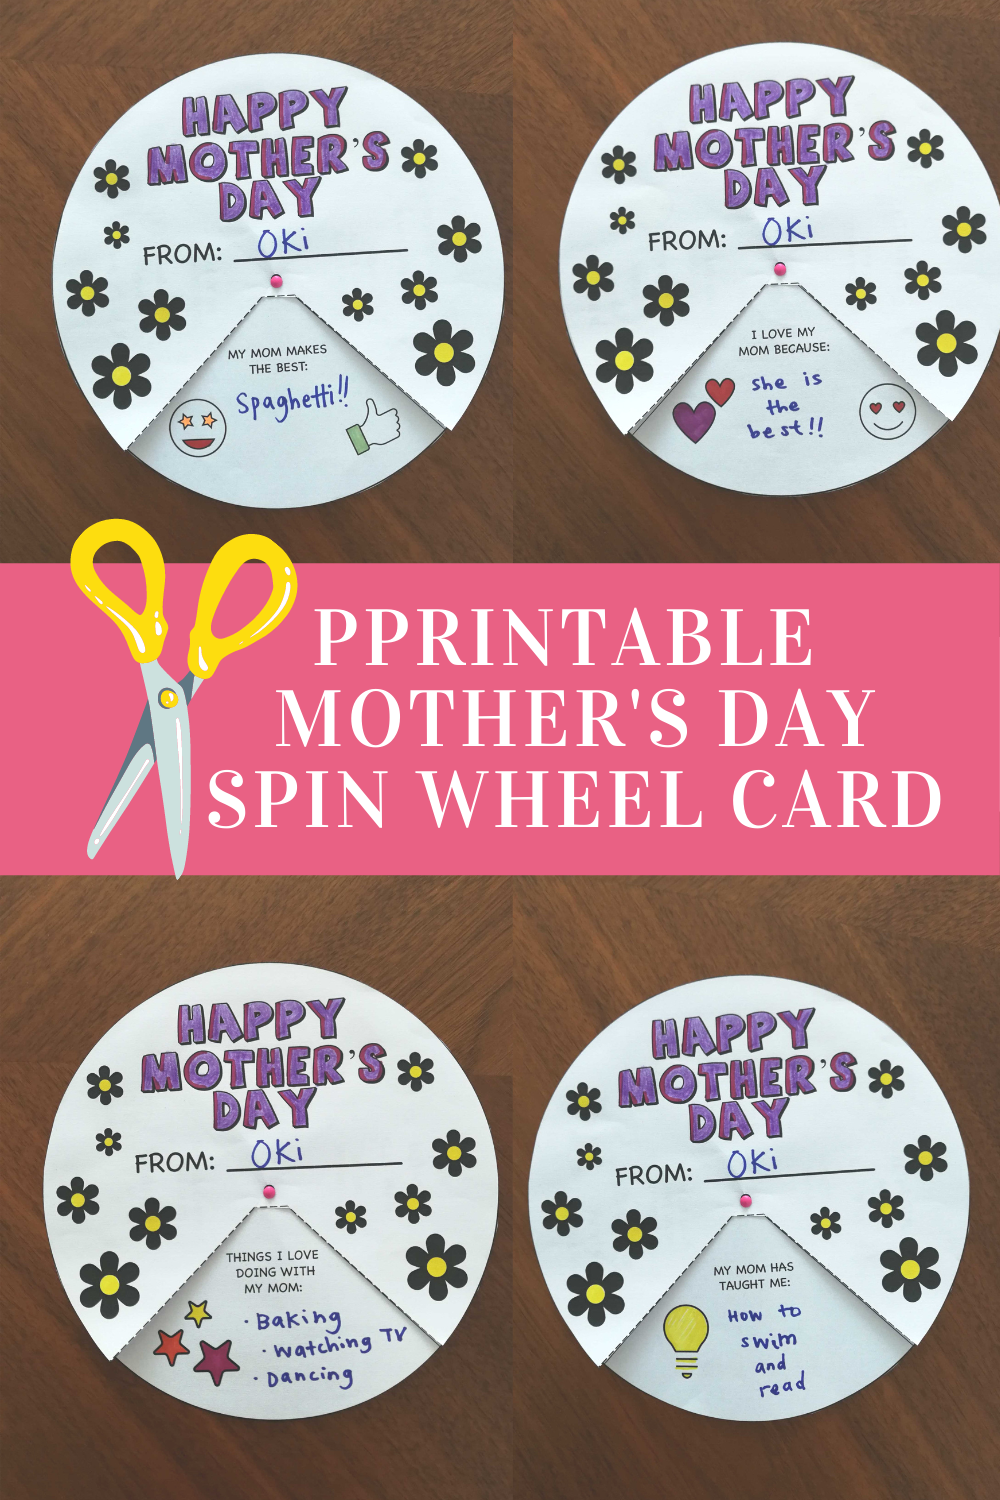 Free Printable Mother’s Day Spinner (Spin Wheel Card)